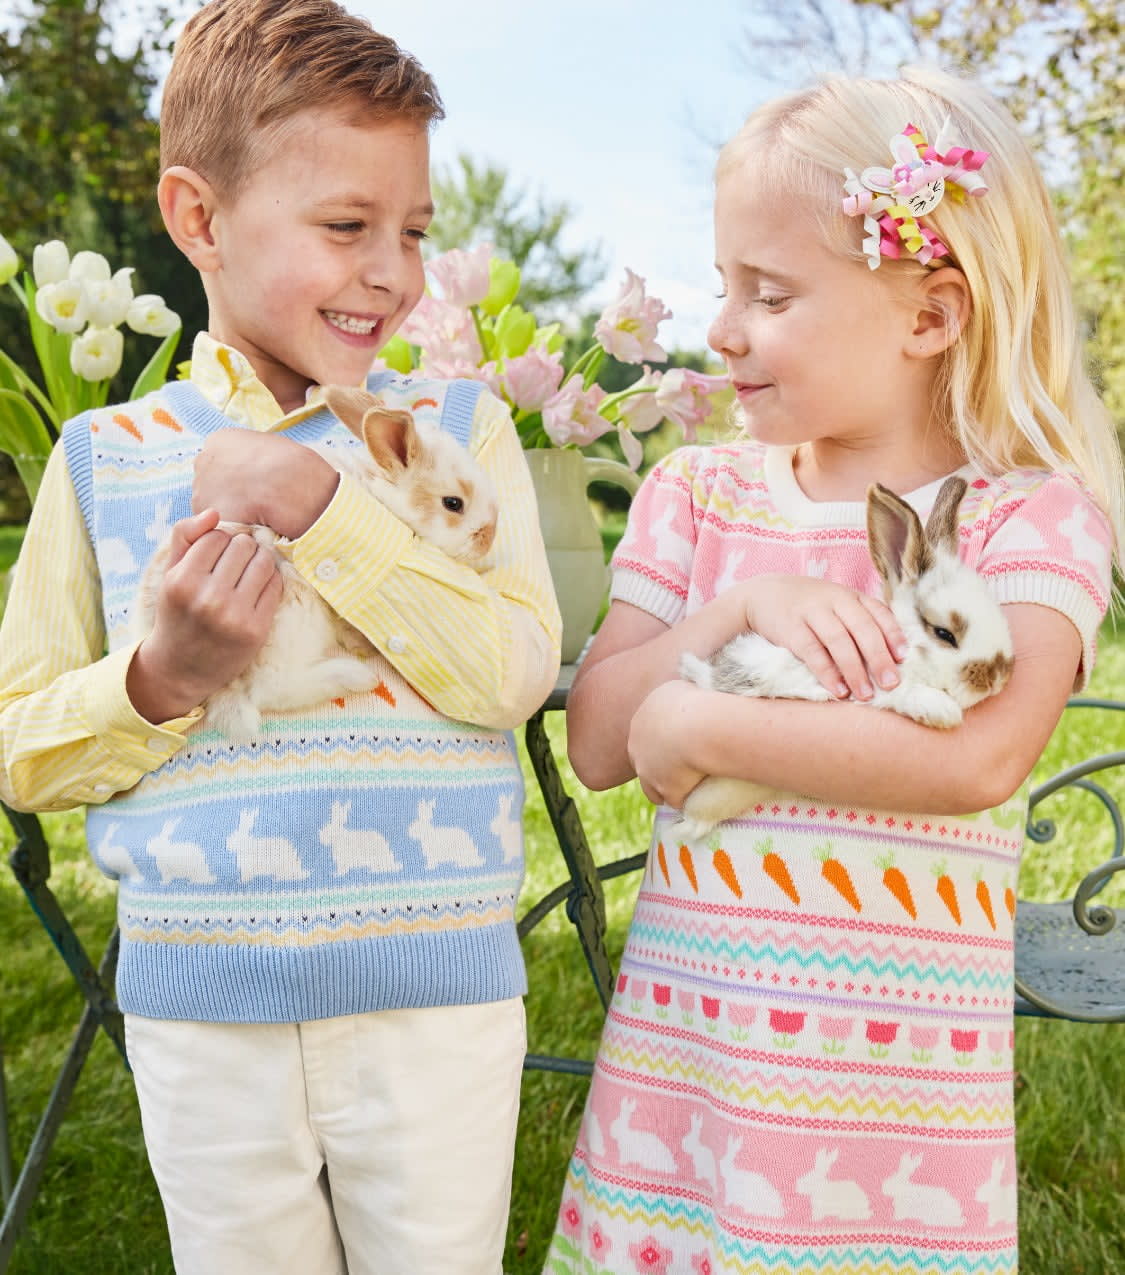 The Hoppy Little Easter Shop | Egg-stra cute collections for every-bunny in the family! 40% off